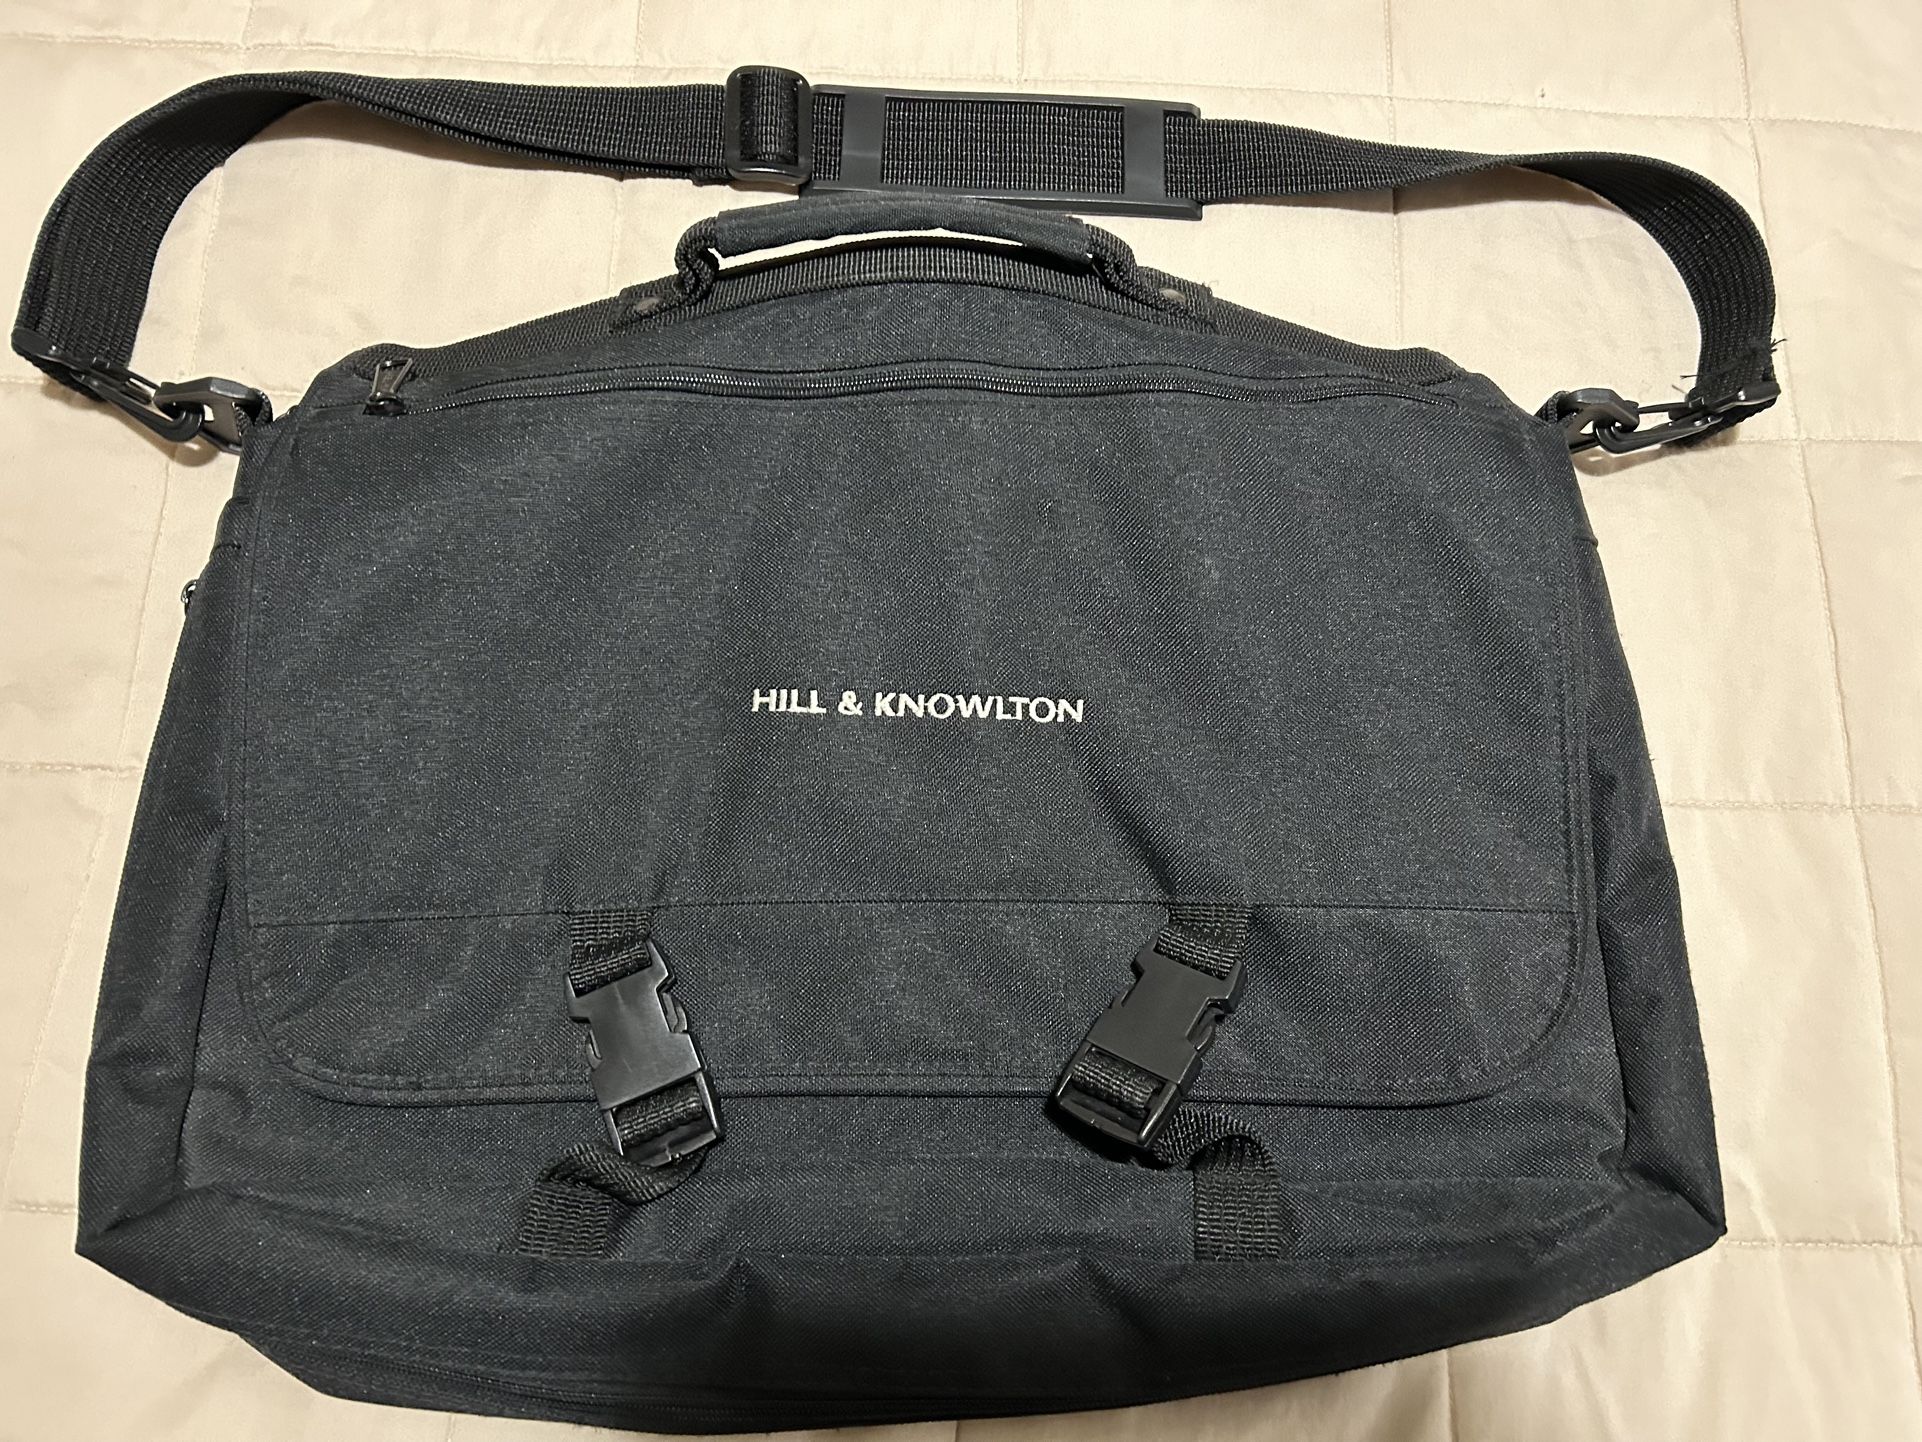 Hill & Knowlton Black Canvas Laptop/Messenger Bag/New /Never Used